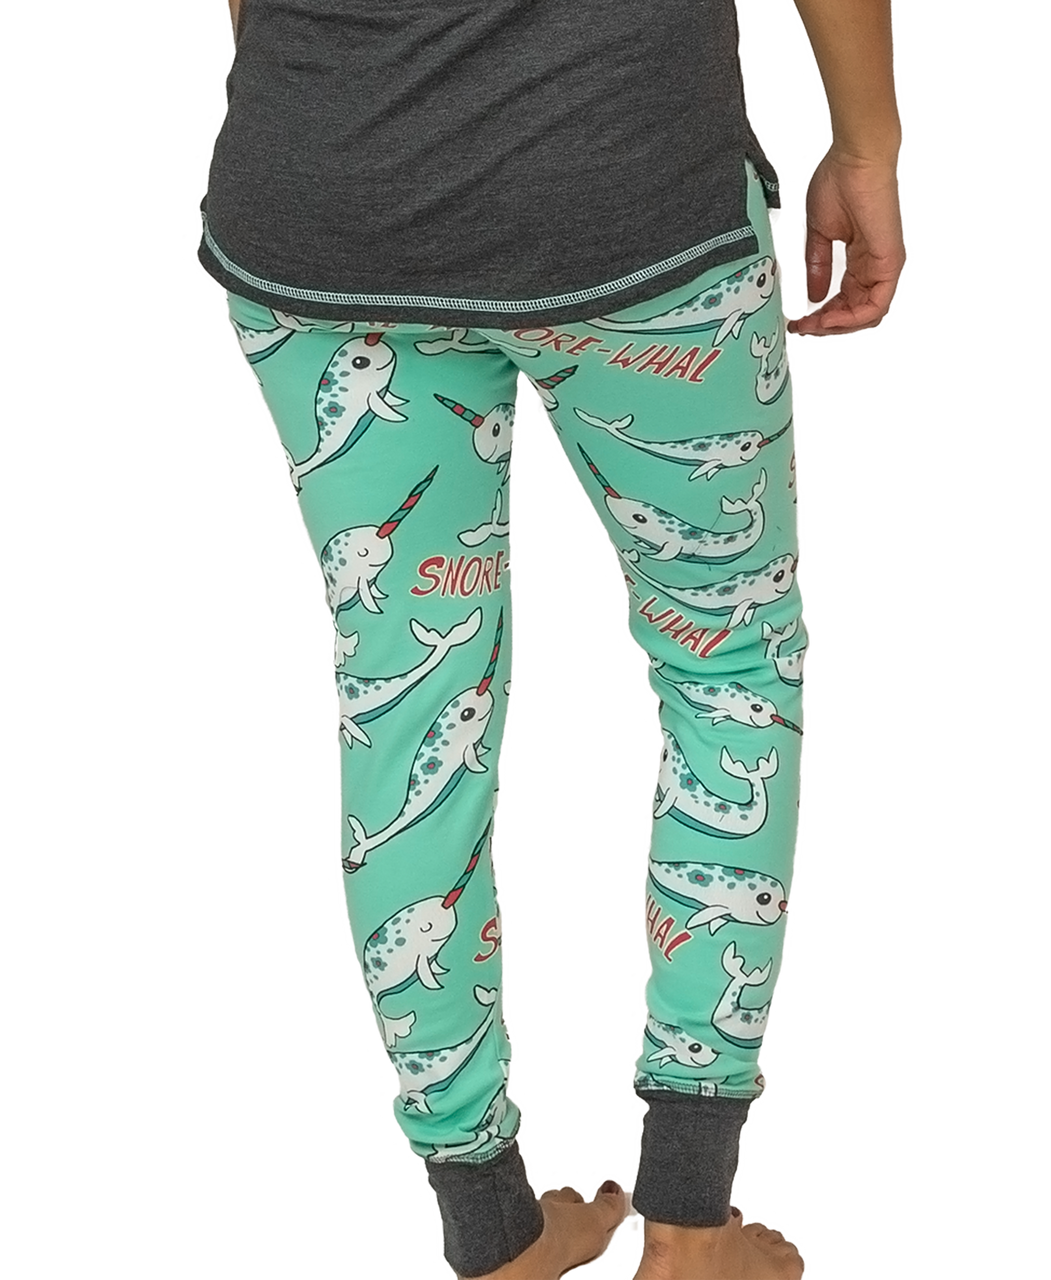 SnoreWhal Women's Narwhal Legging - Lazy One